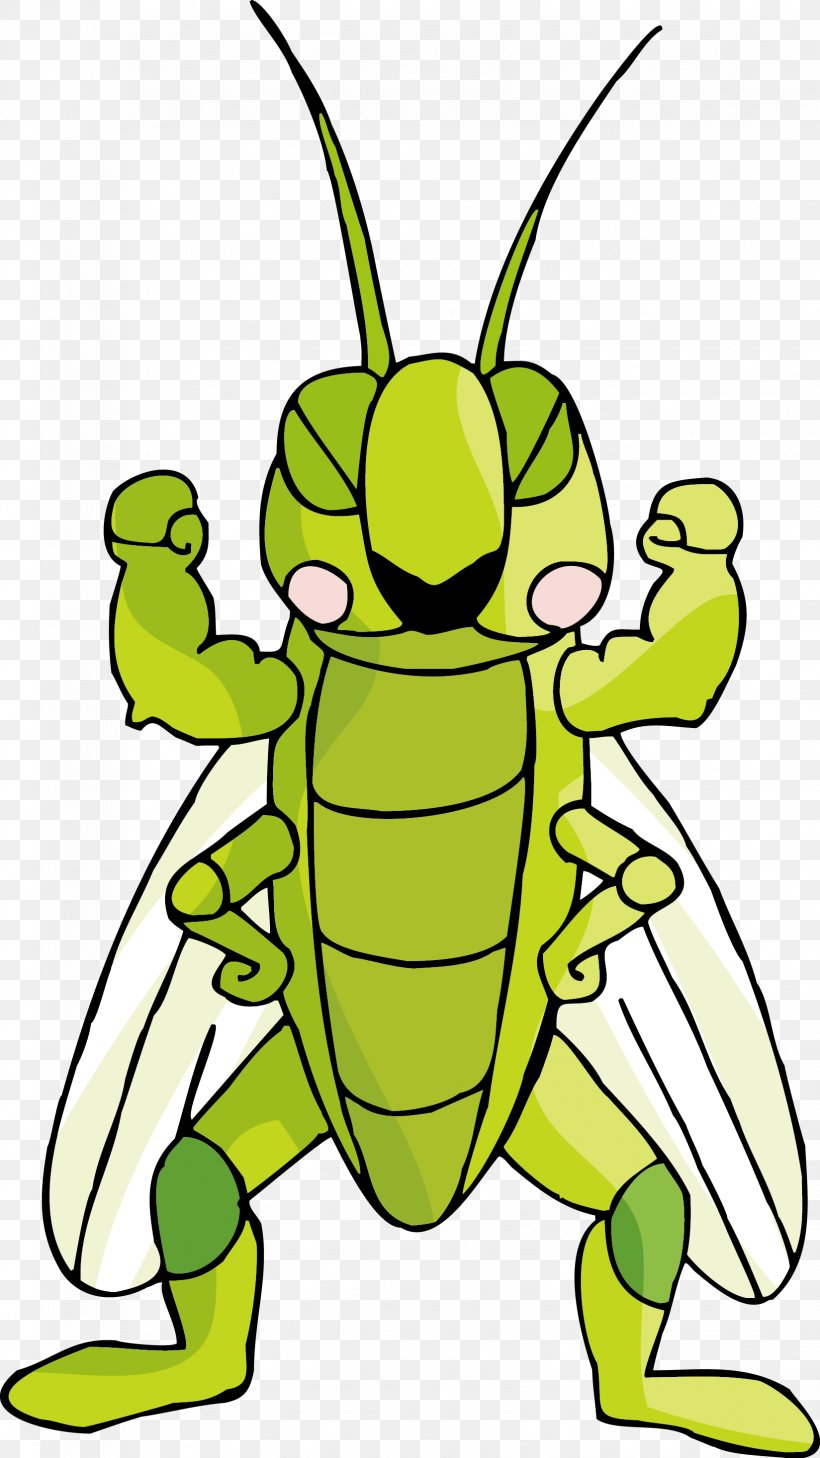 Insect Cartoon Locust Illustration, PNG, 1649x2934px, Insect, Animal, Artwork, Caelifera, Cartoon Download Free